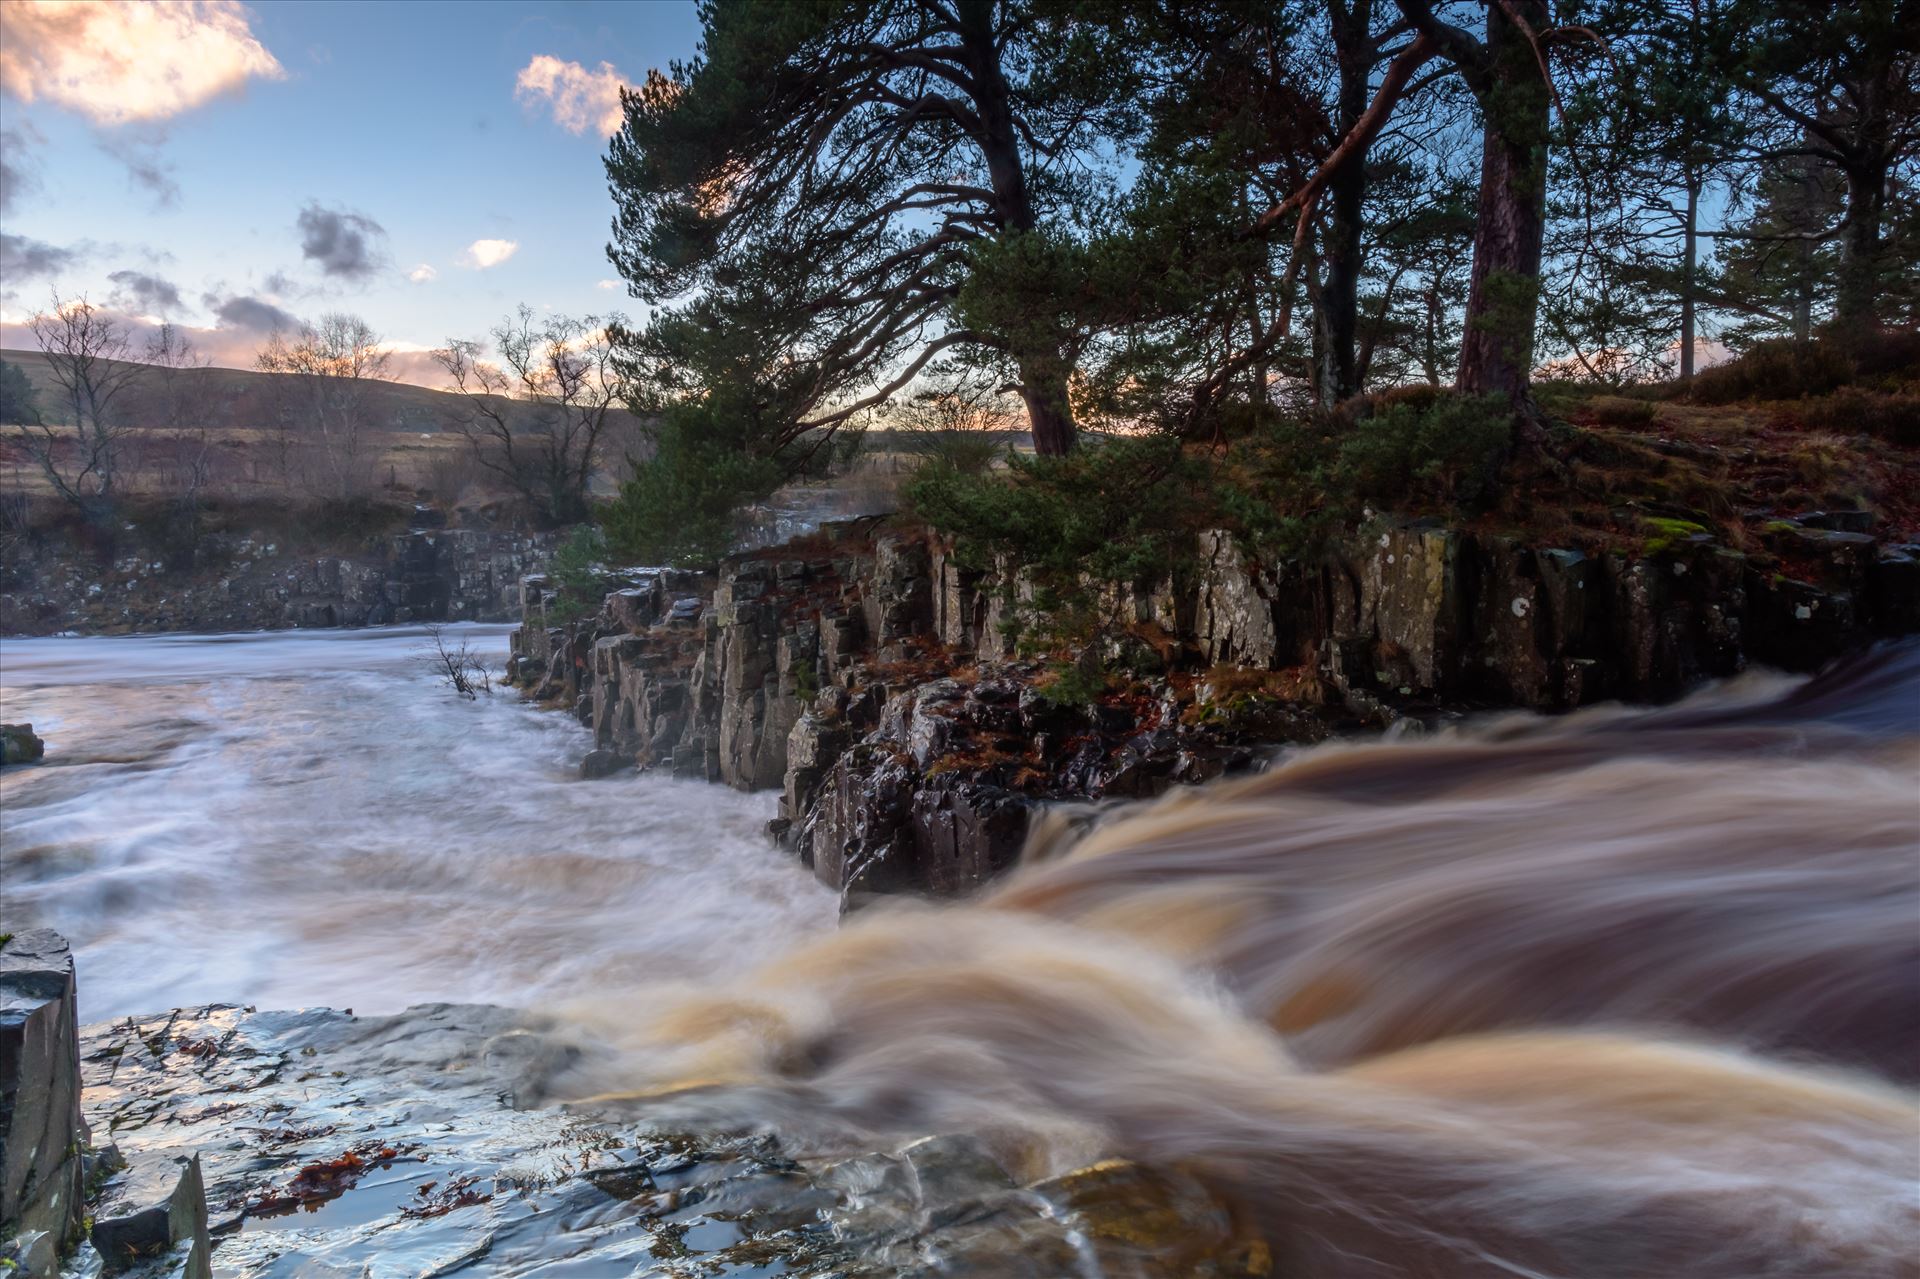 Low Force, Teesdale Low Force is a set of waterfalls on the River Tees in beautiful Upper Teesdale. by philreay